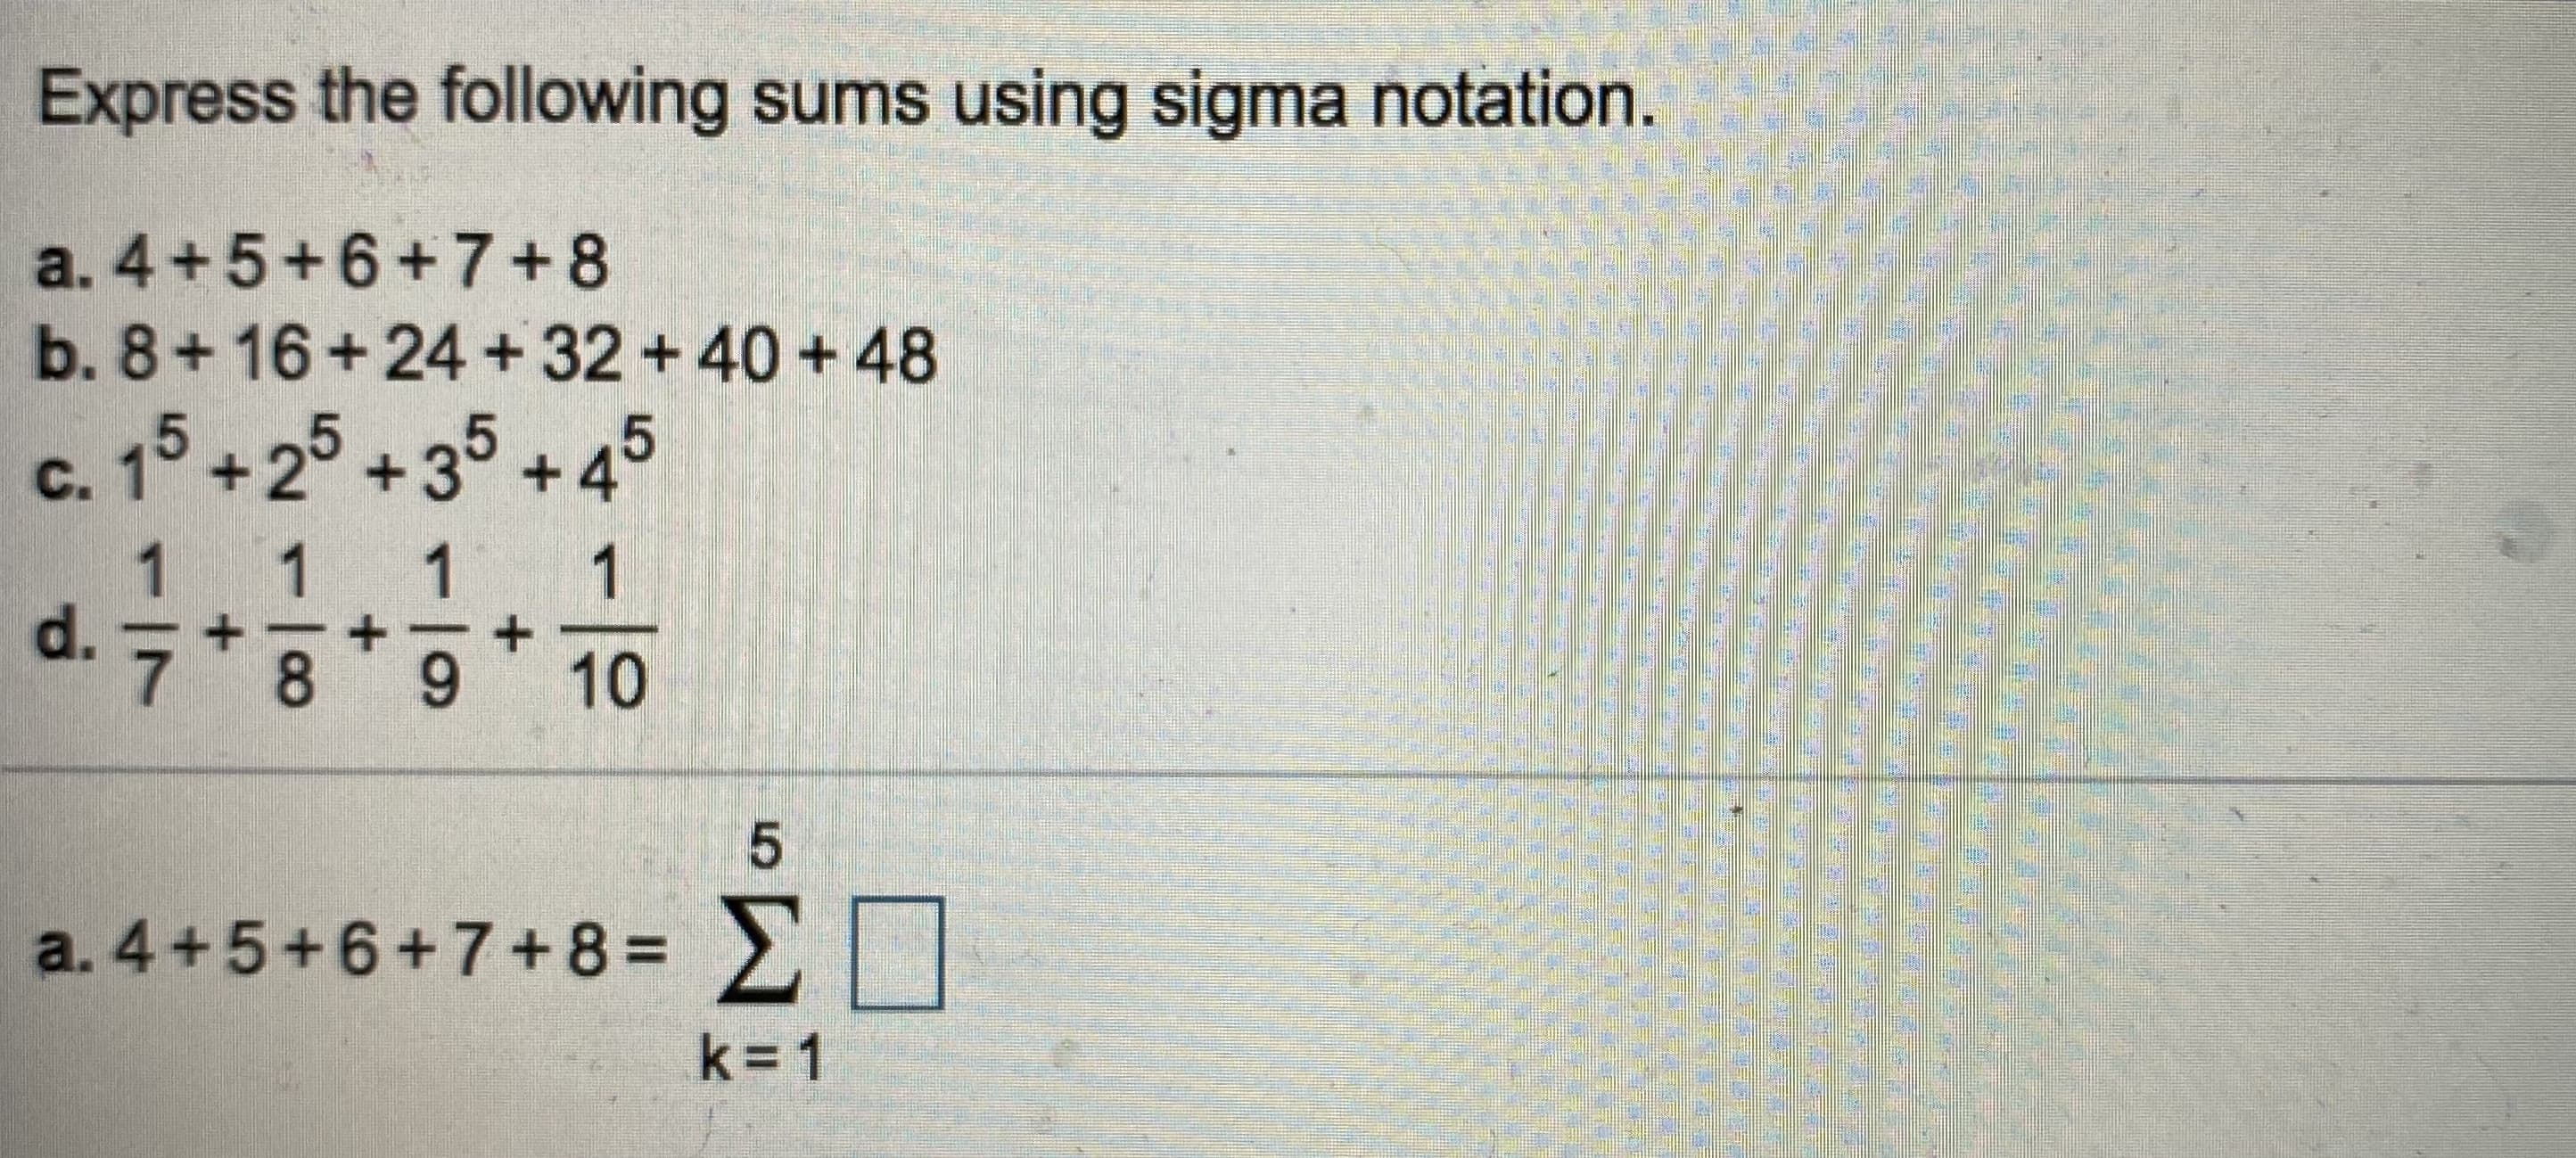 Express the following sums using sigma notation.
a. 4+5+6+7+8
b. 8+16+24+32 +40 +48
c. 15 +25 +35 +4
